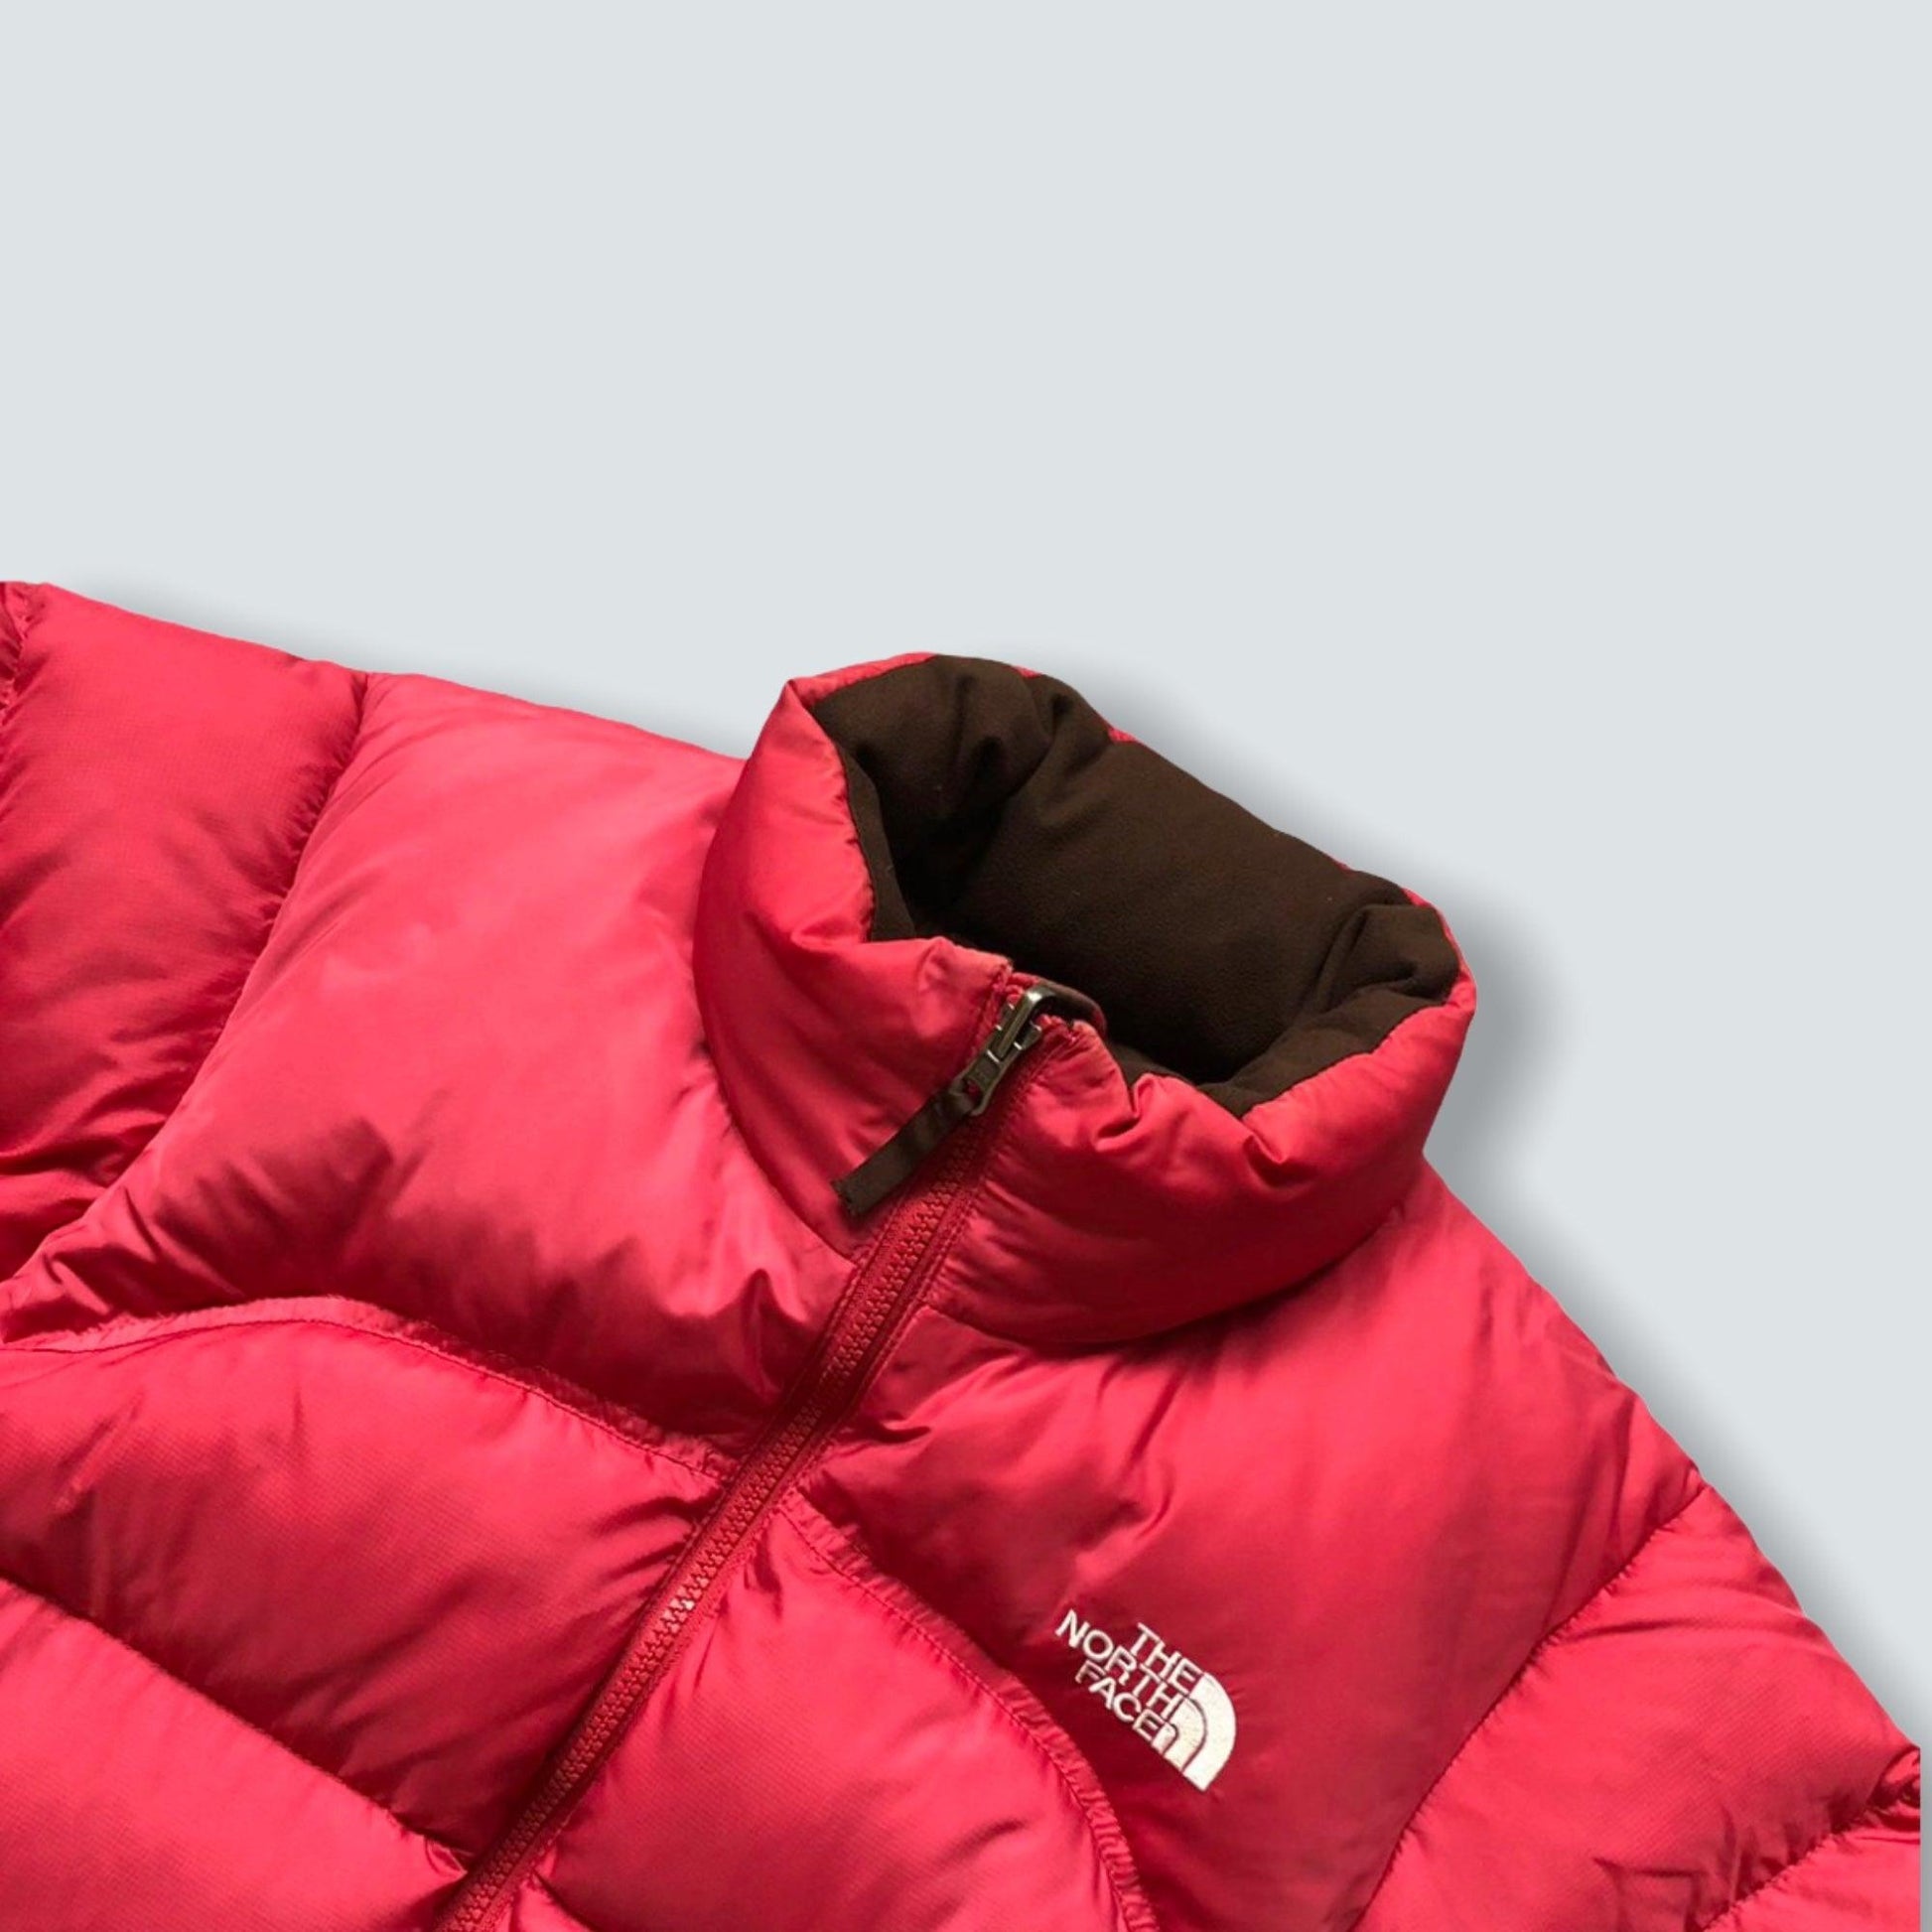 Pink North Face Nuptse 700 Puffer jacket with Brown interior (M woman’s) - Known Source